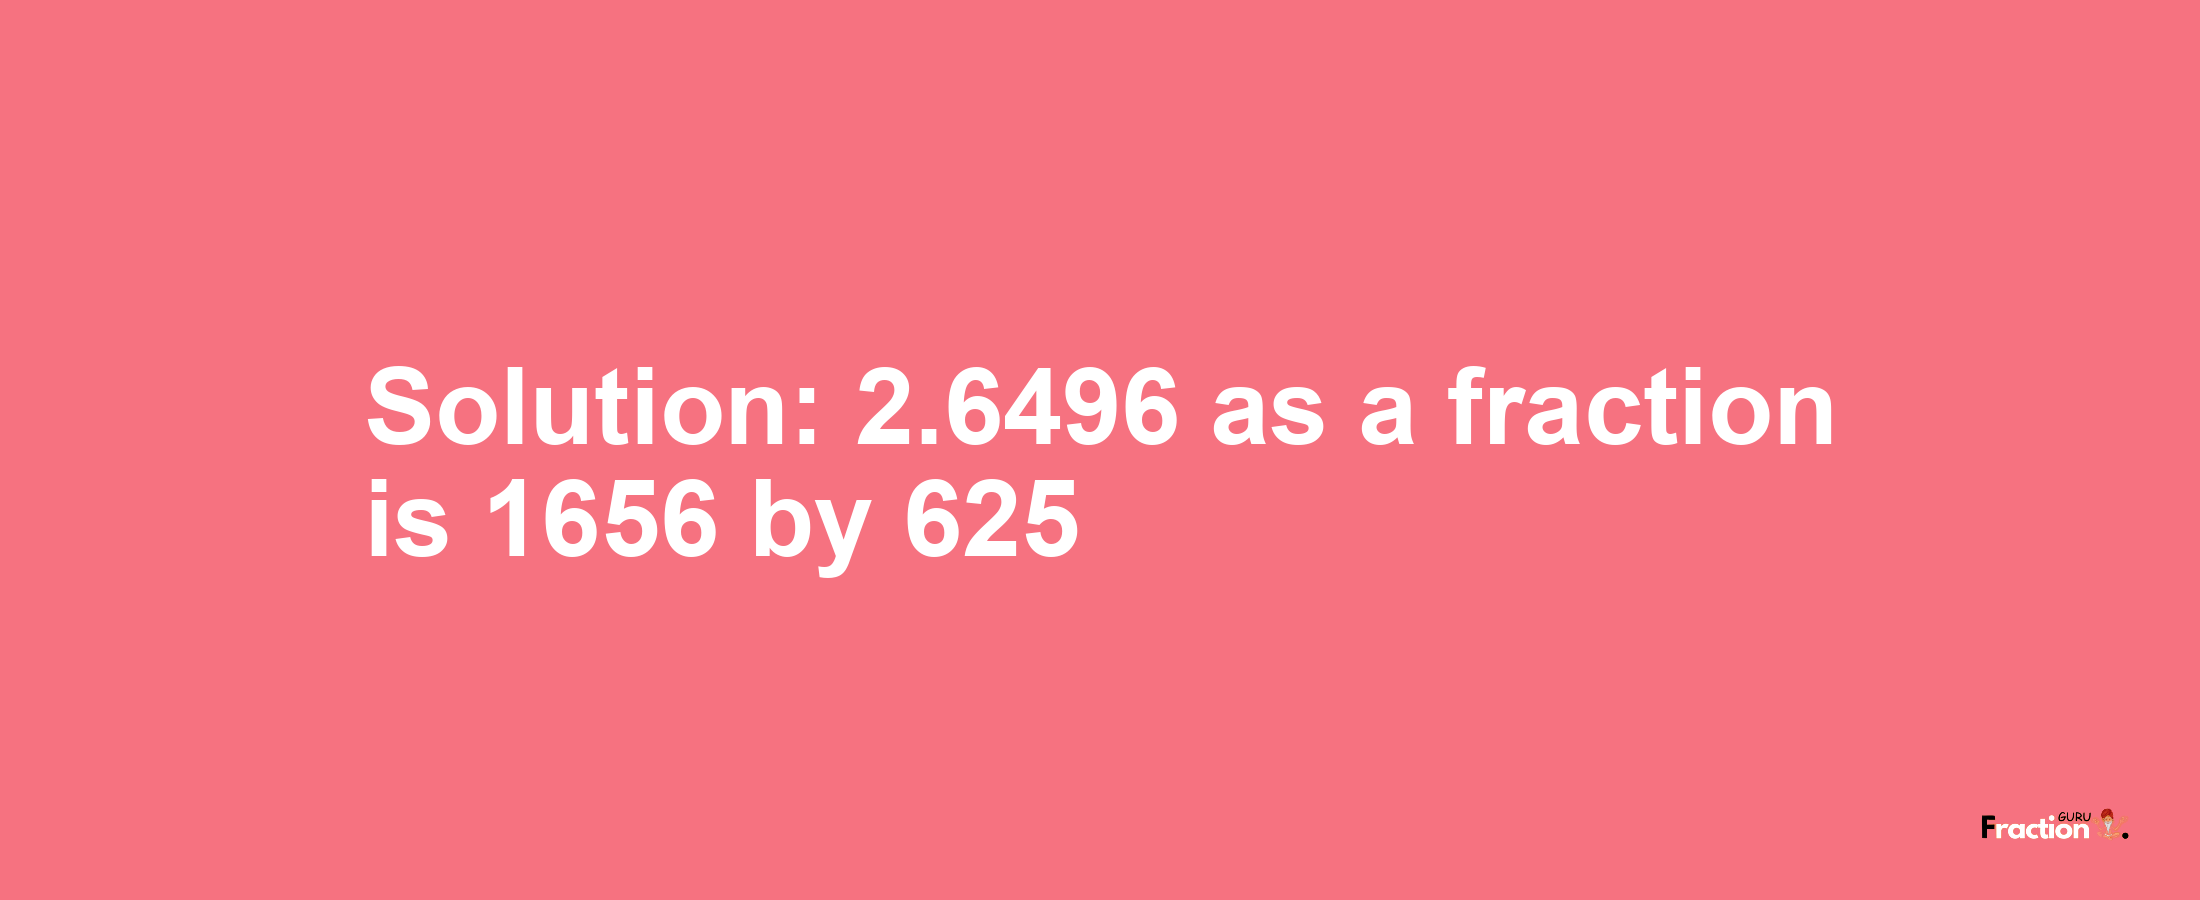 Solution:2.6496 as a fraction is 1656/625